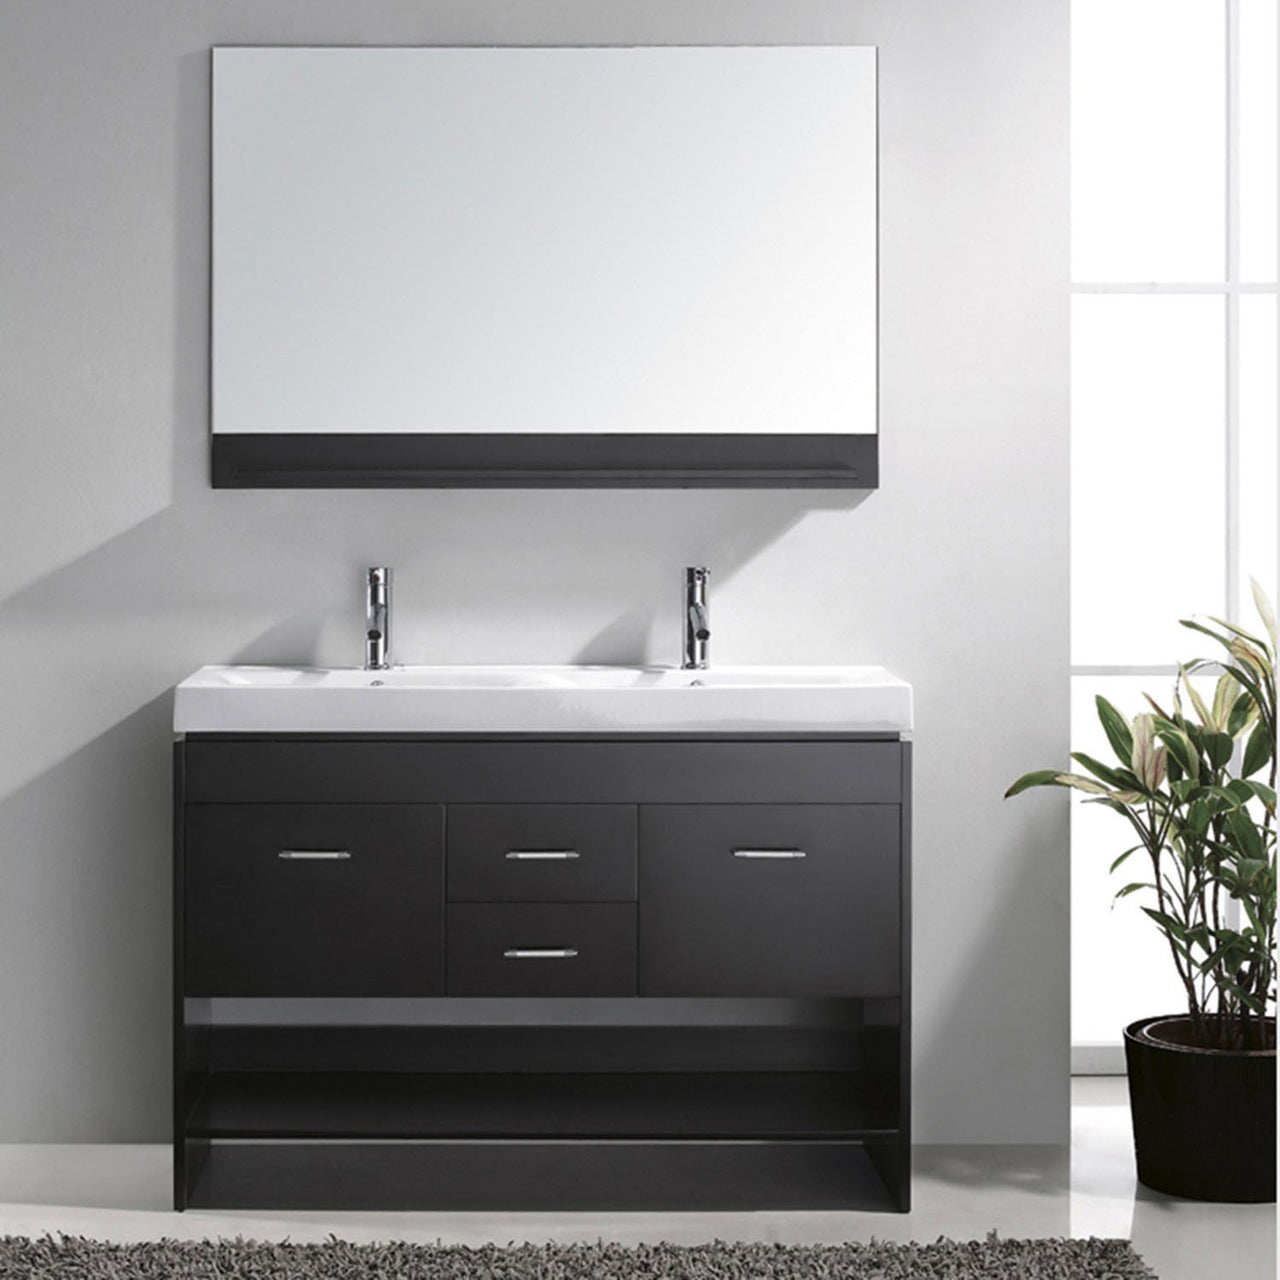 Virtu USA Gloria 48" Double Square Sink Espresso Top Vanity in Espresso with Brushed Nickel Faucet and Mirror Vanity Virtu USA 